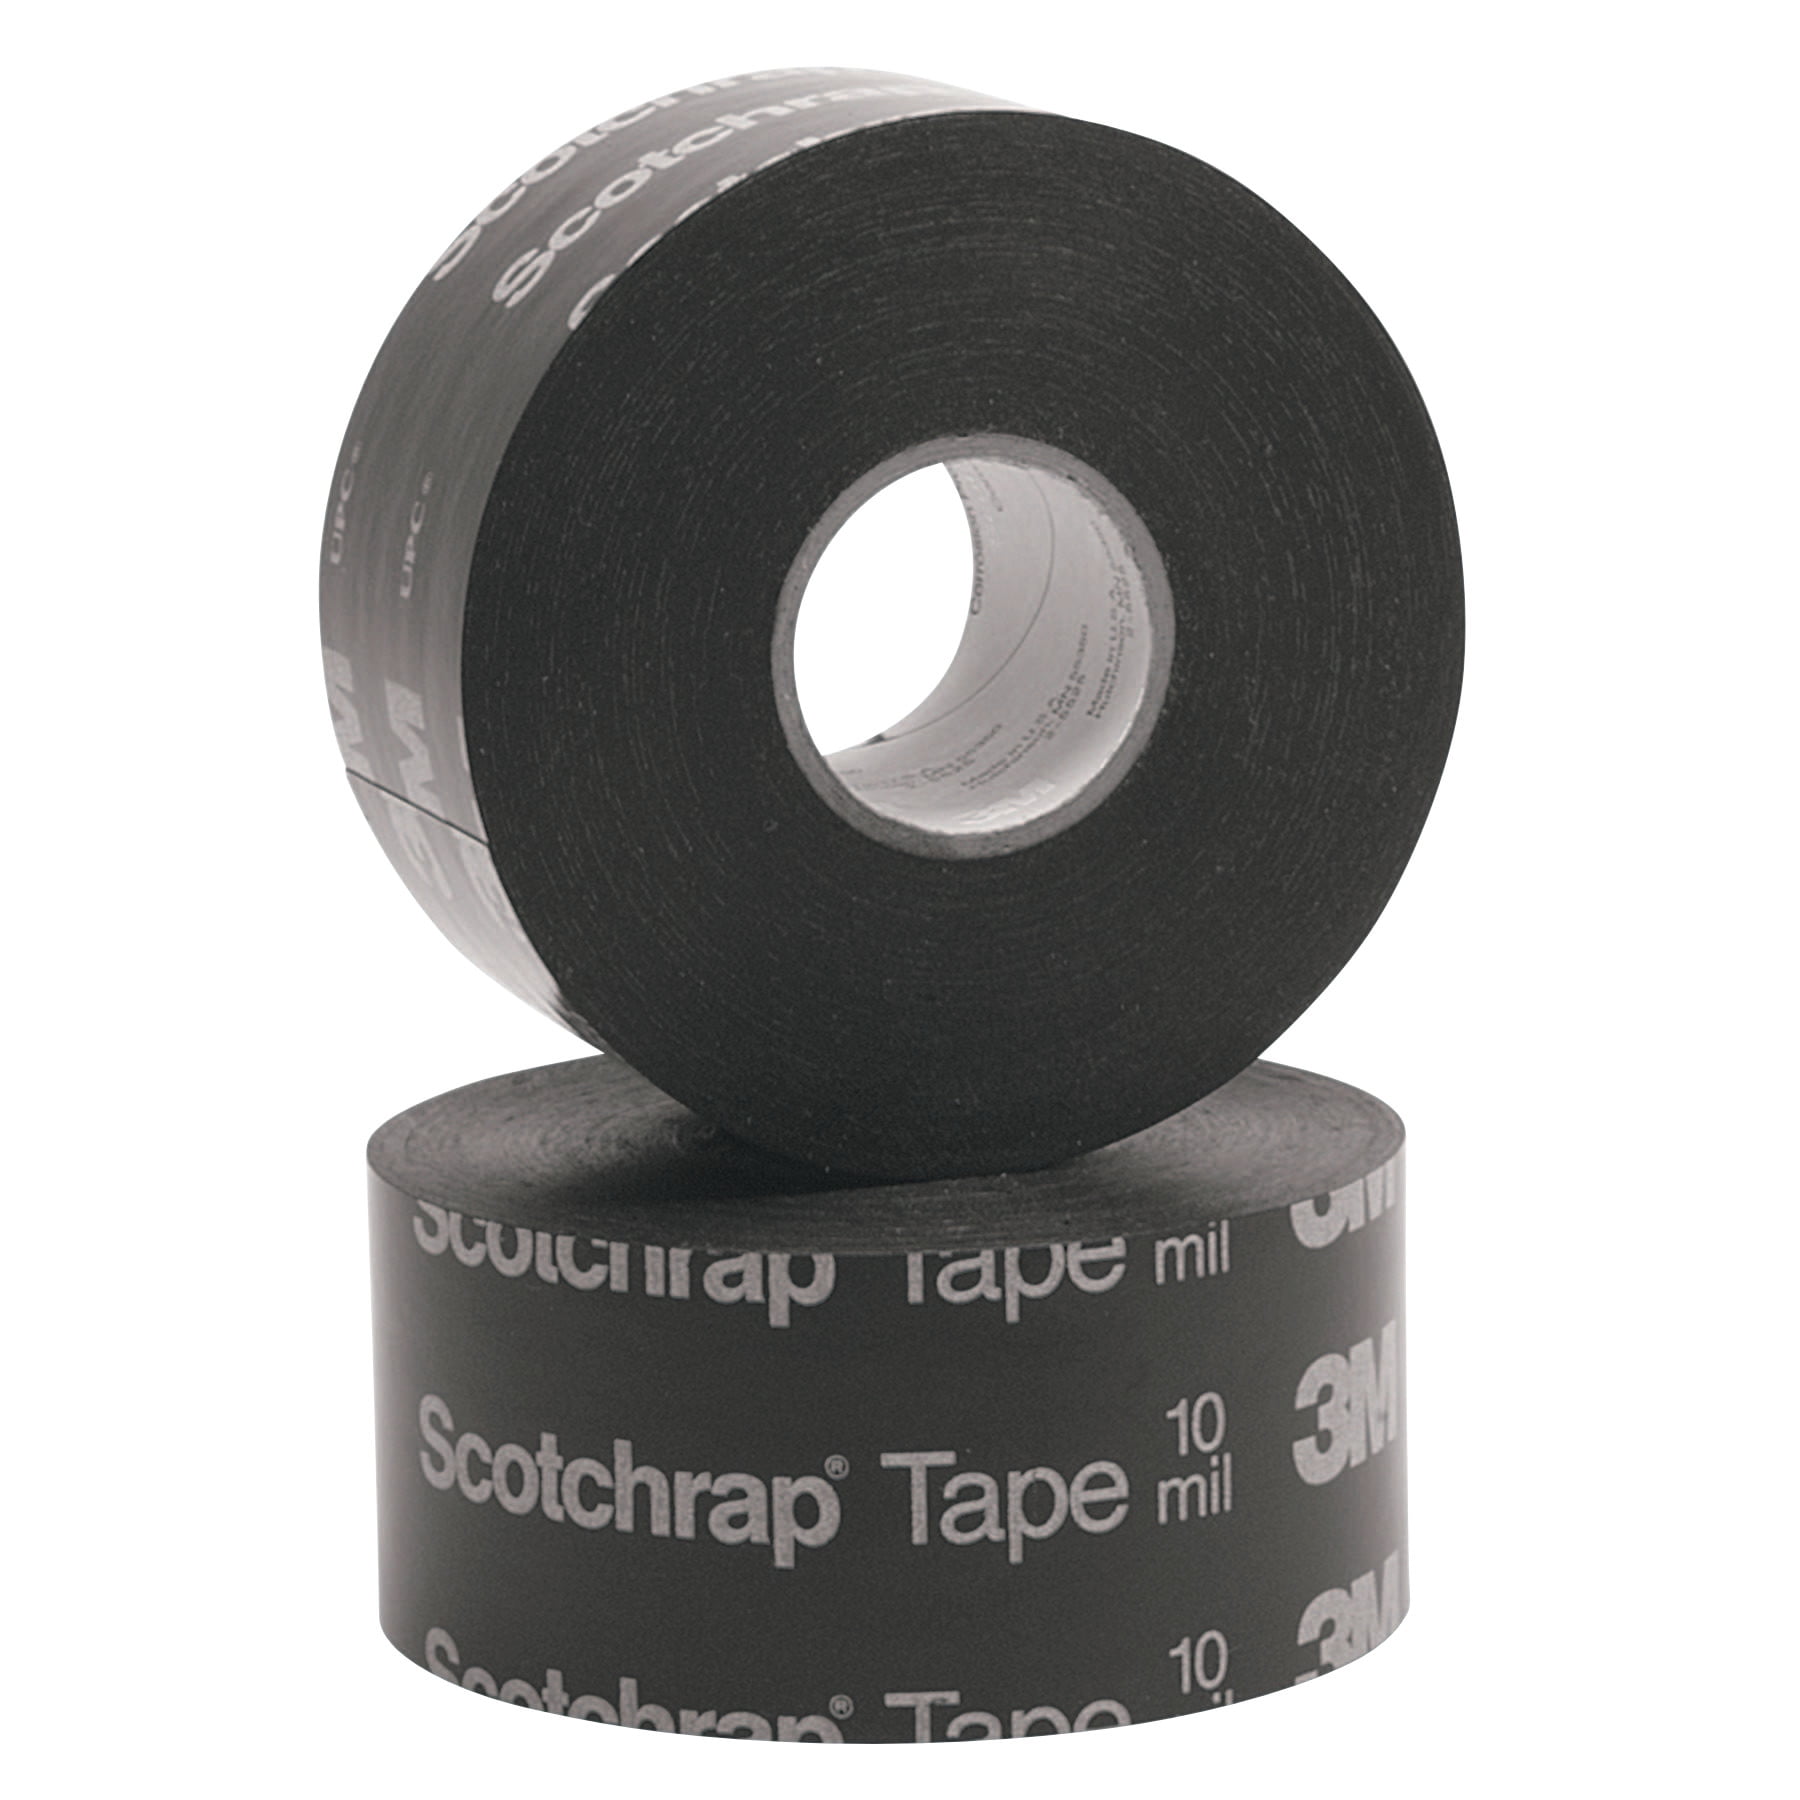 TM 1 1/2 in x 15 ft 38 mm x 4,6m Linerless Electrical Rubber Tape 2242 3M